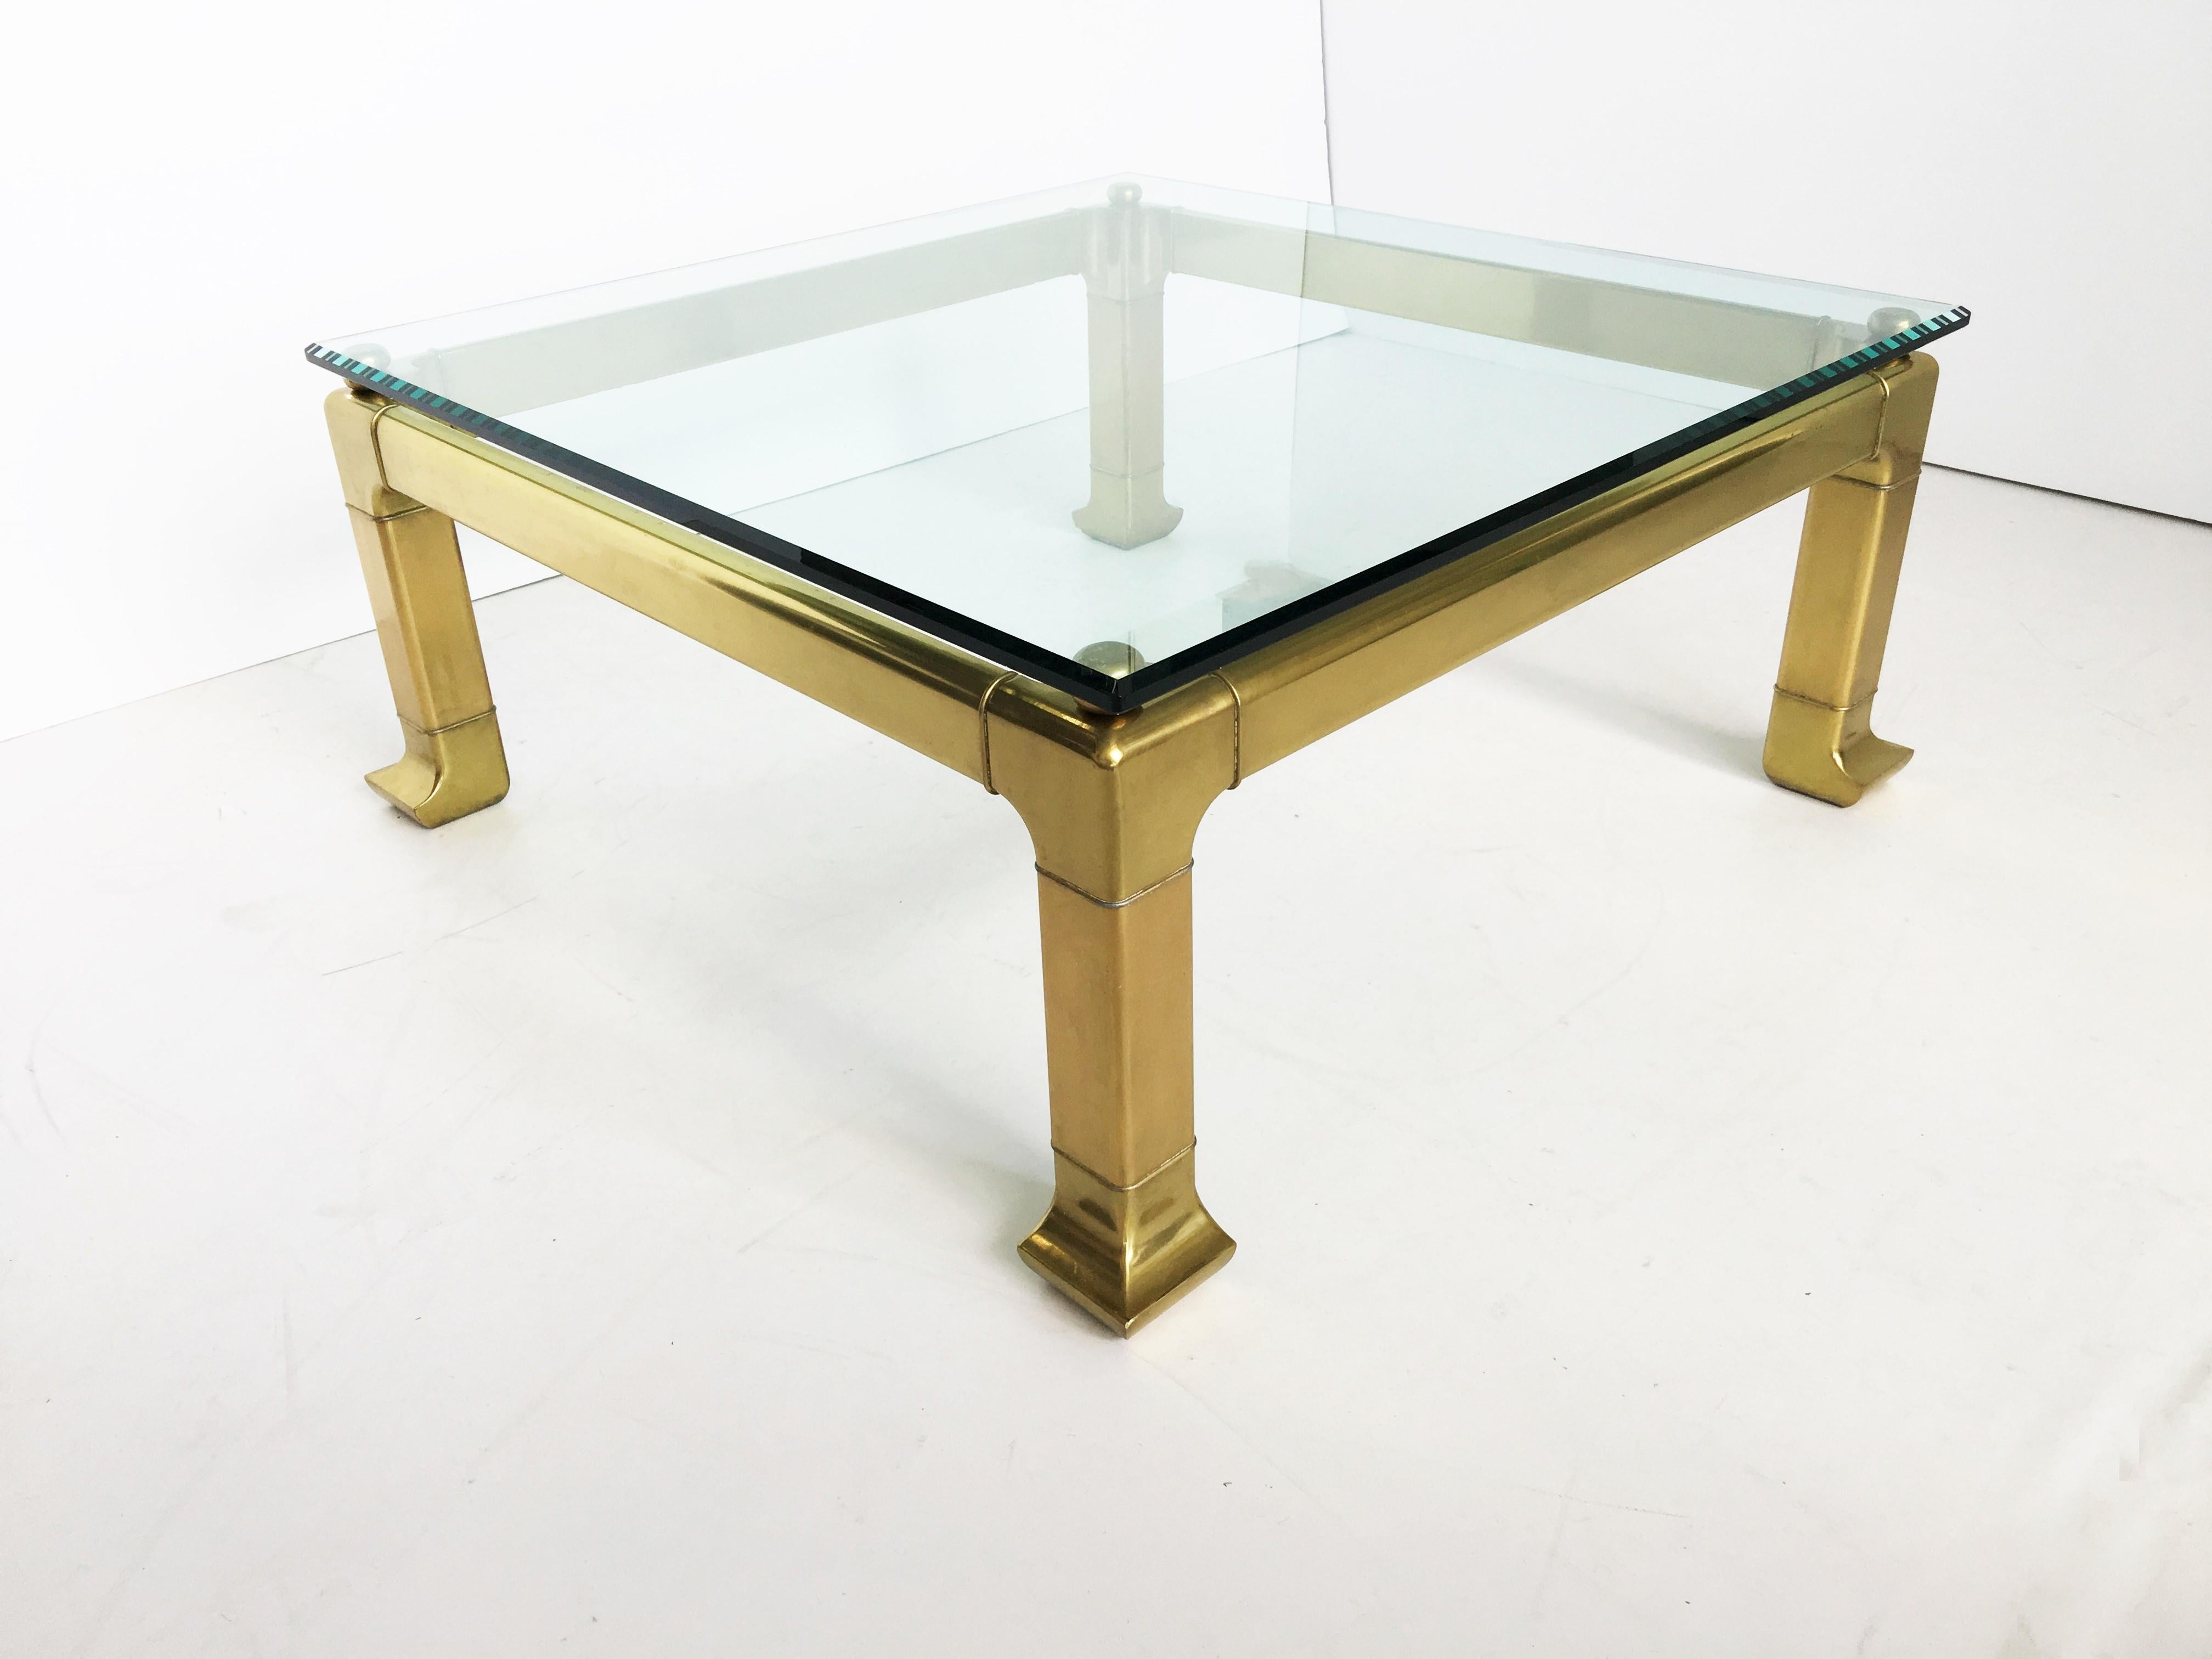 Incredible brass coffee table with Asian styling by Mastercraft. Composed of a brass frame and a glass top, this elegant coffee table offers a vintage charm that radiates grace and sophistication. Beautiful patina. Hollywood Regency style.